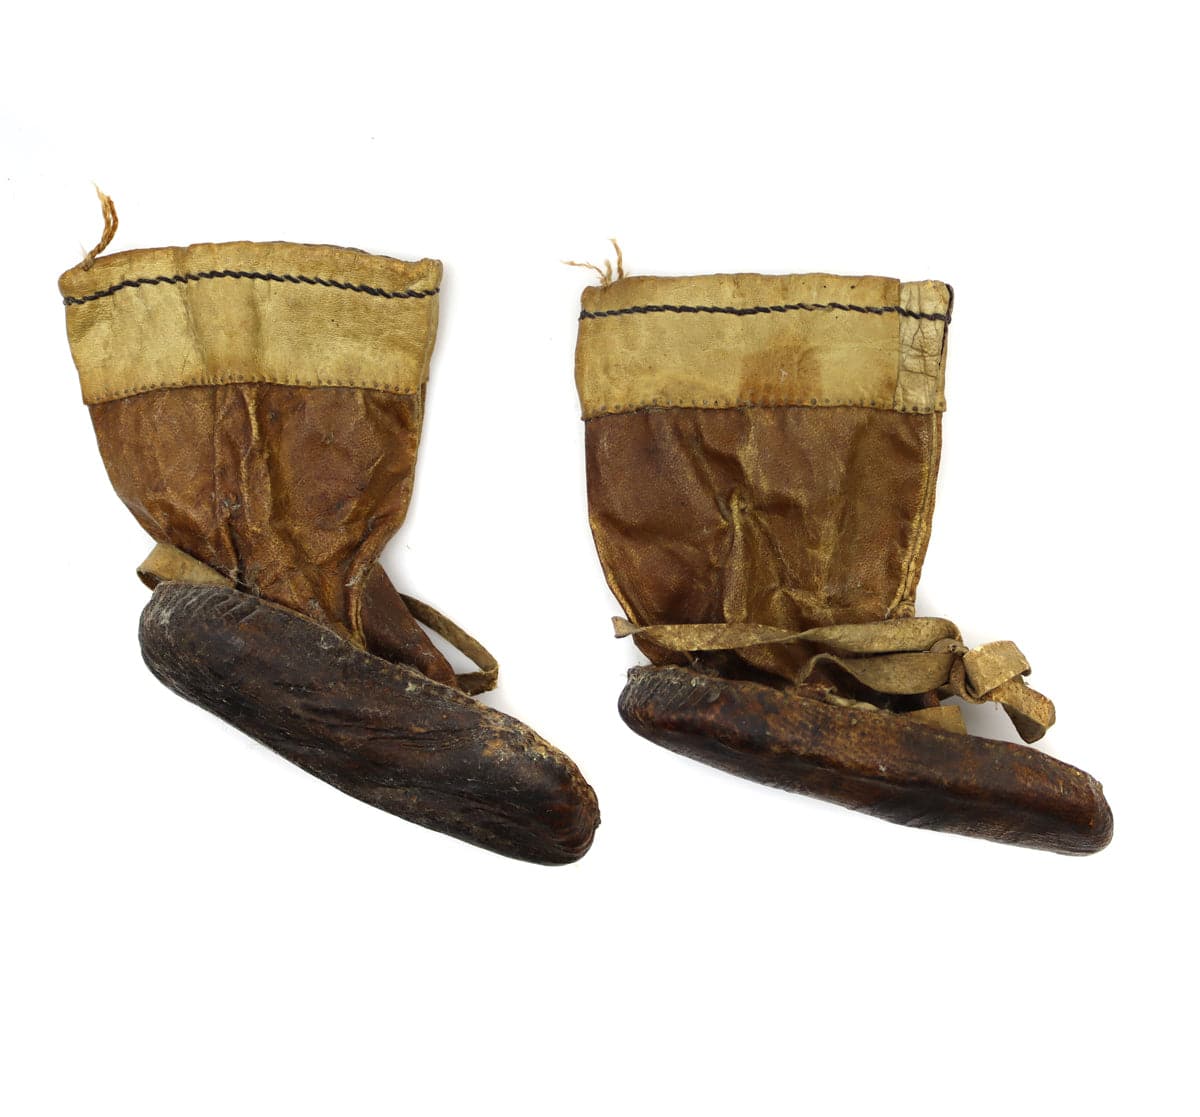 Alaskan Child's Leather Moccasins and Leather and Wooden Drum c. 1900s (M1763) 15
